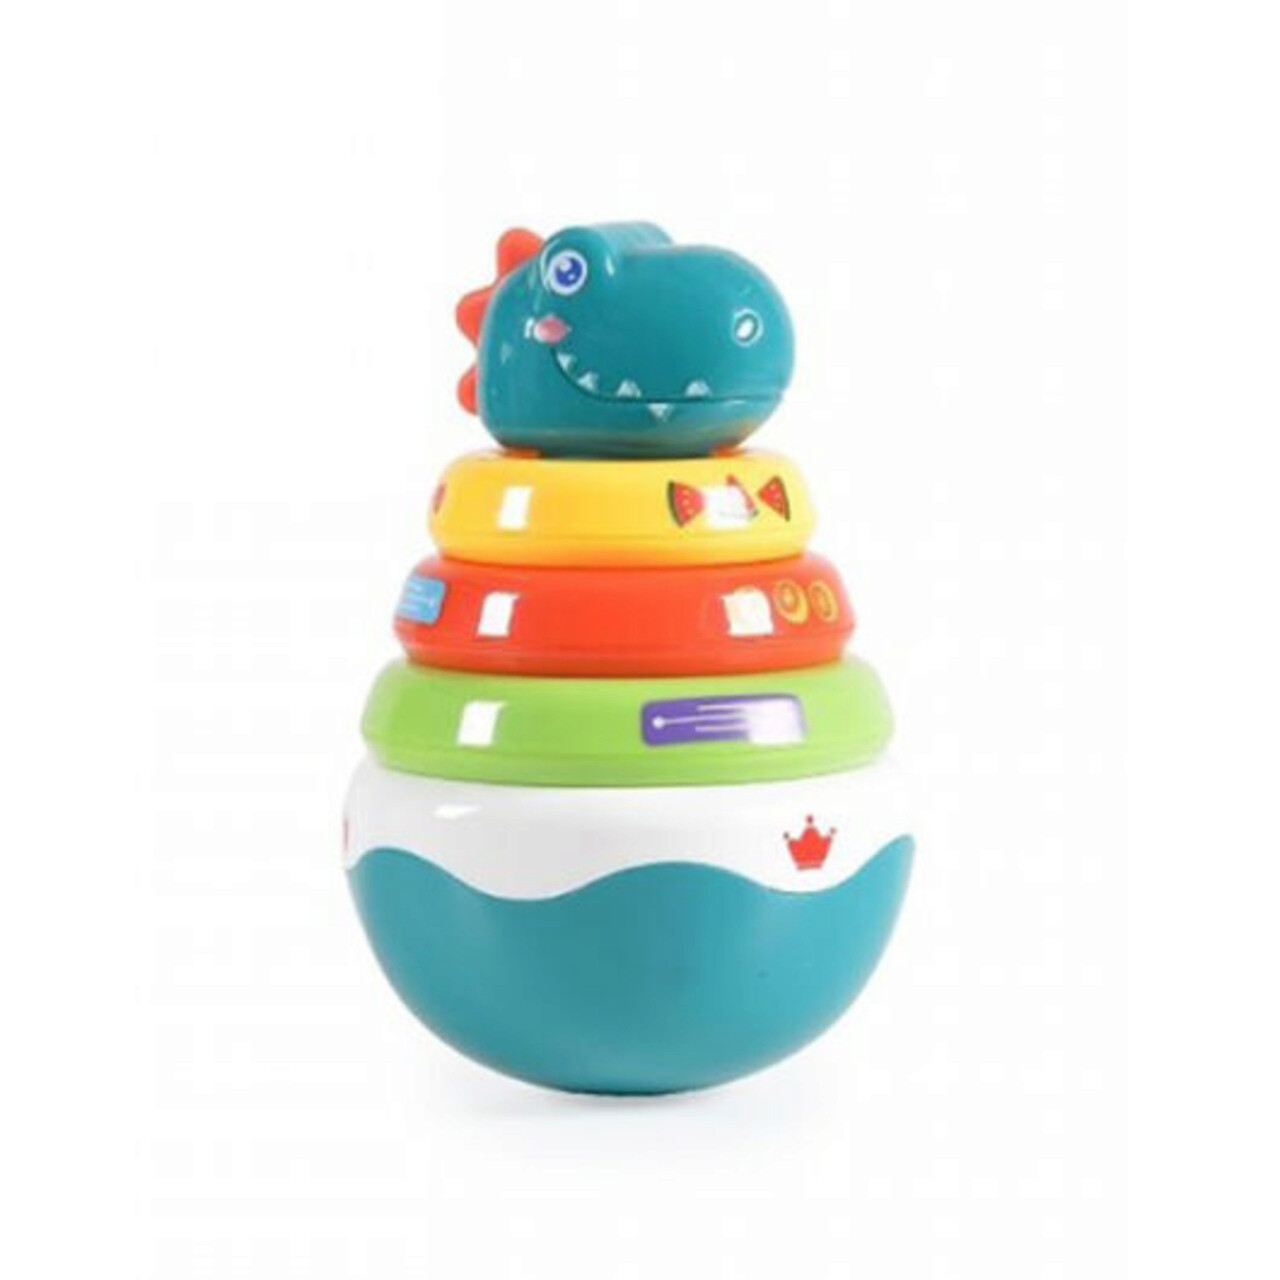 Jucarie Hopa-Mitica, Stacking Roly Poly, HE0298, 6M+, plastic, multicolor